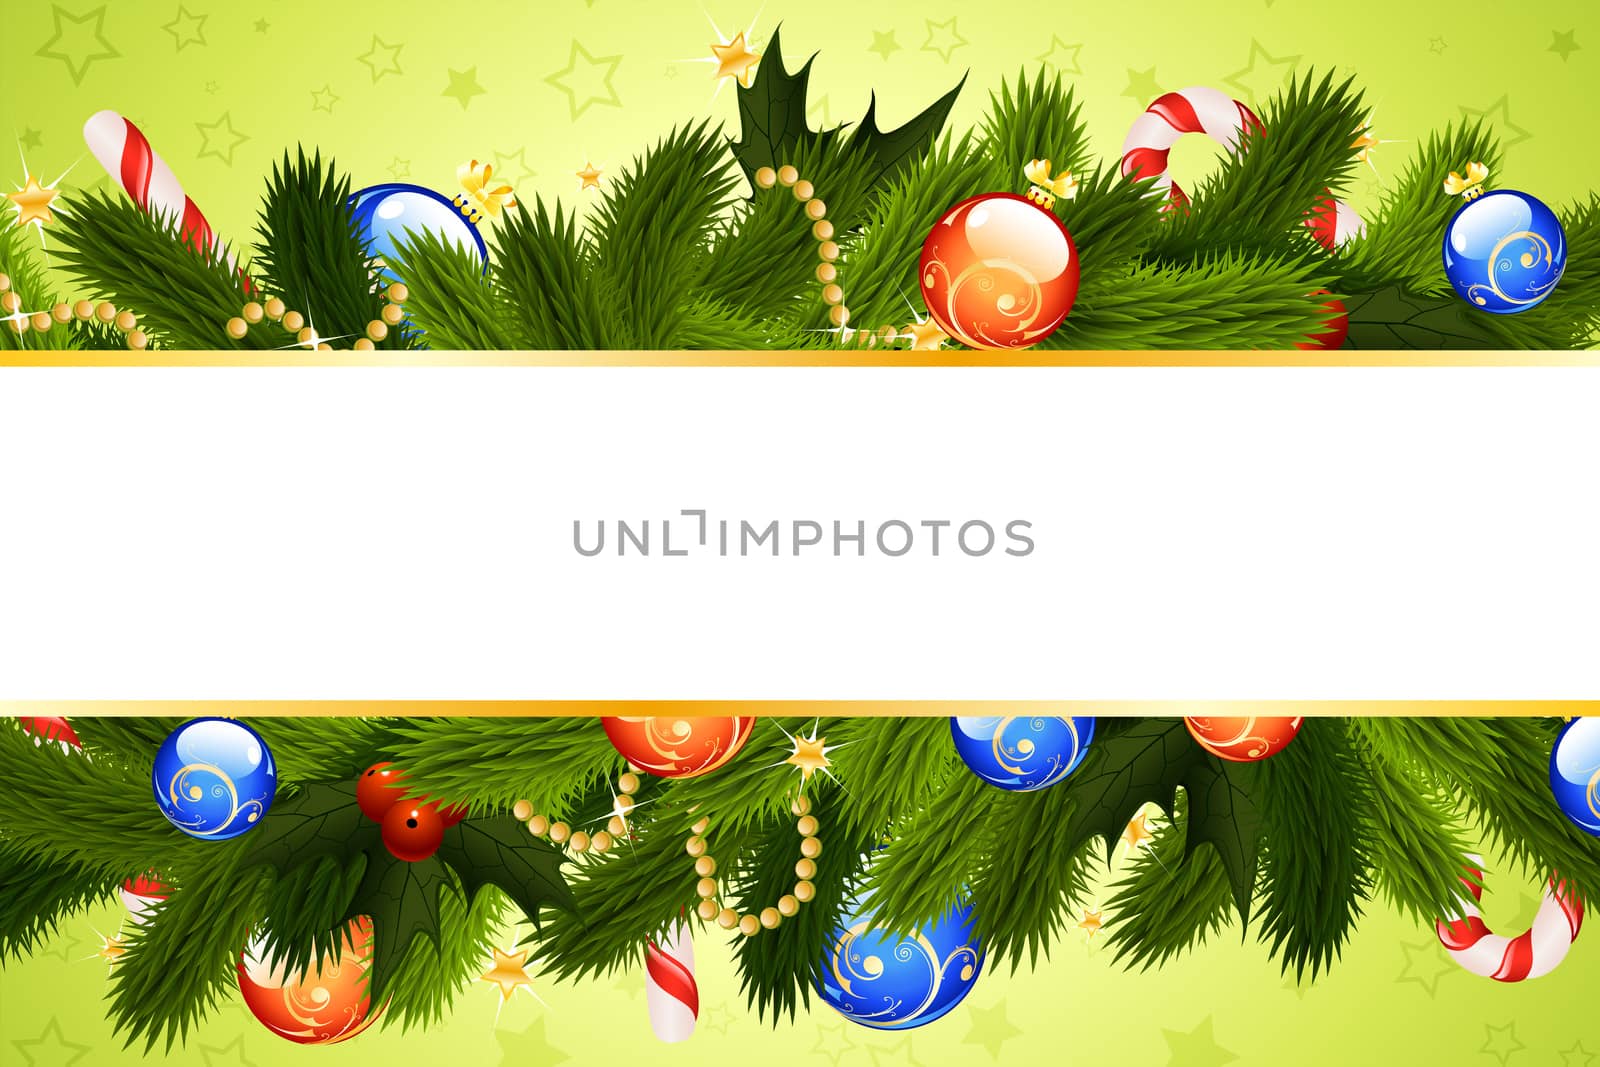 Grunge Christmas background with Christmas tree stars and balls for your design